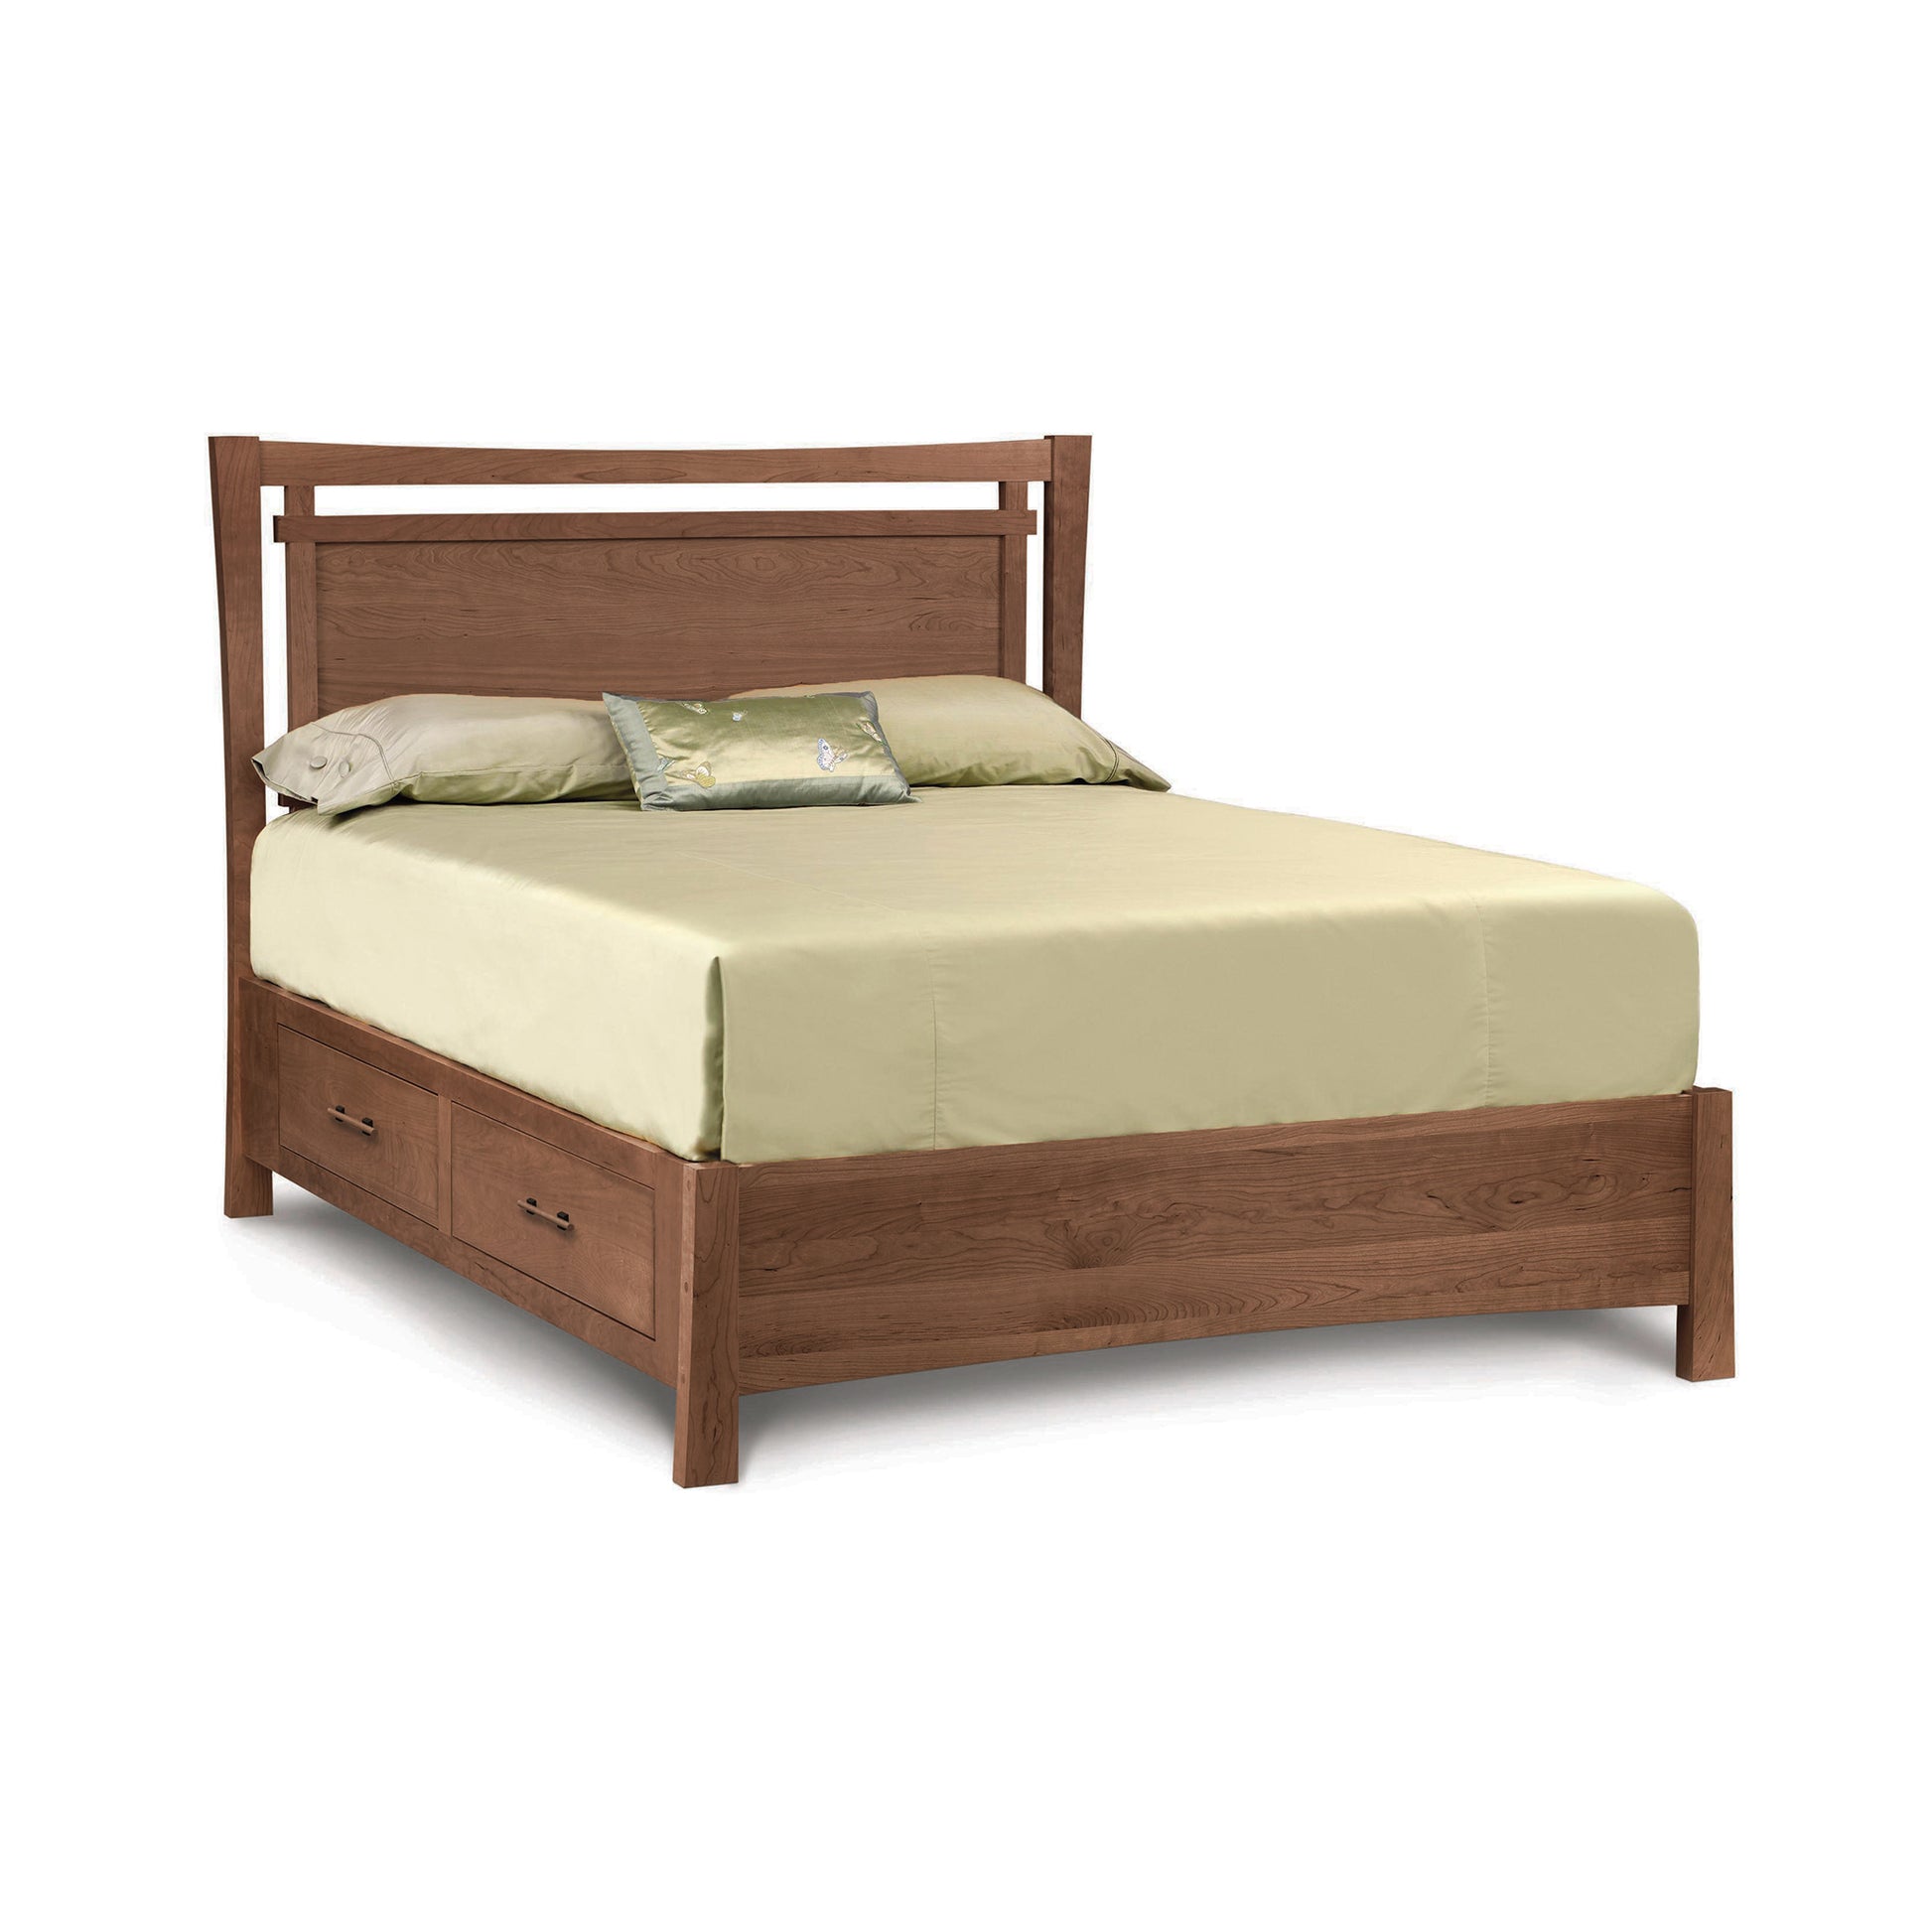 The Monterey Storage Bed from Copeland Furniture features a beautiful wooden headboard and footboard, crafted from luxurious cherry wood. With its elegant design, this bed not only provides a comfortable sleeping surface but also offers convenient under